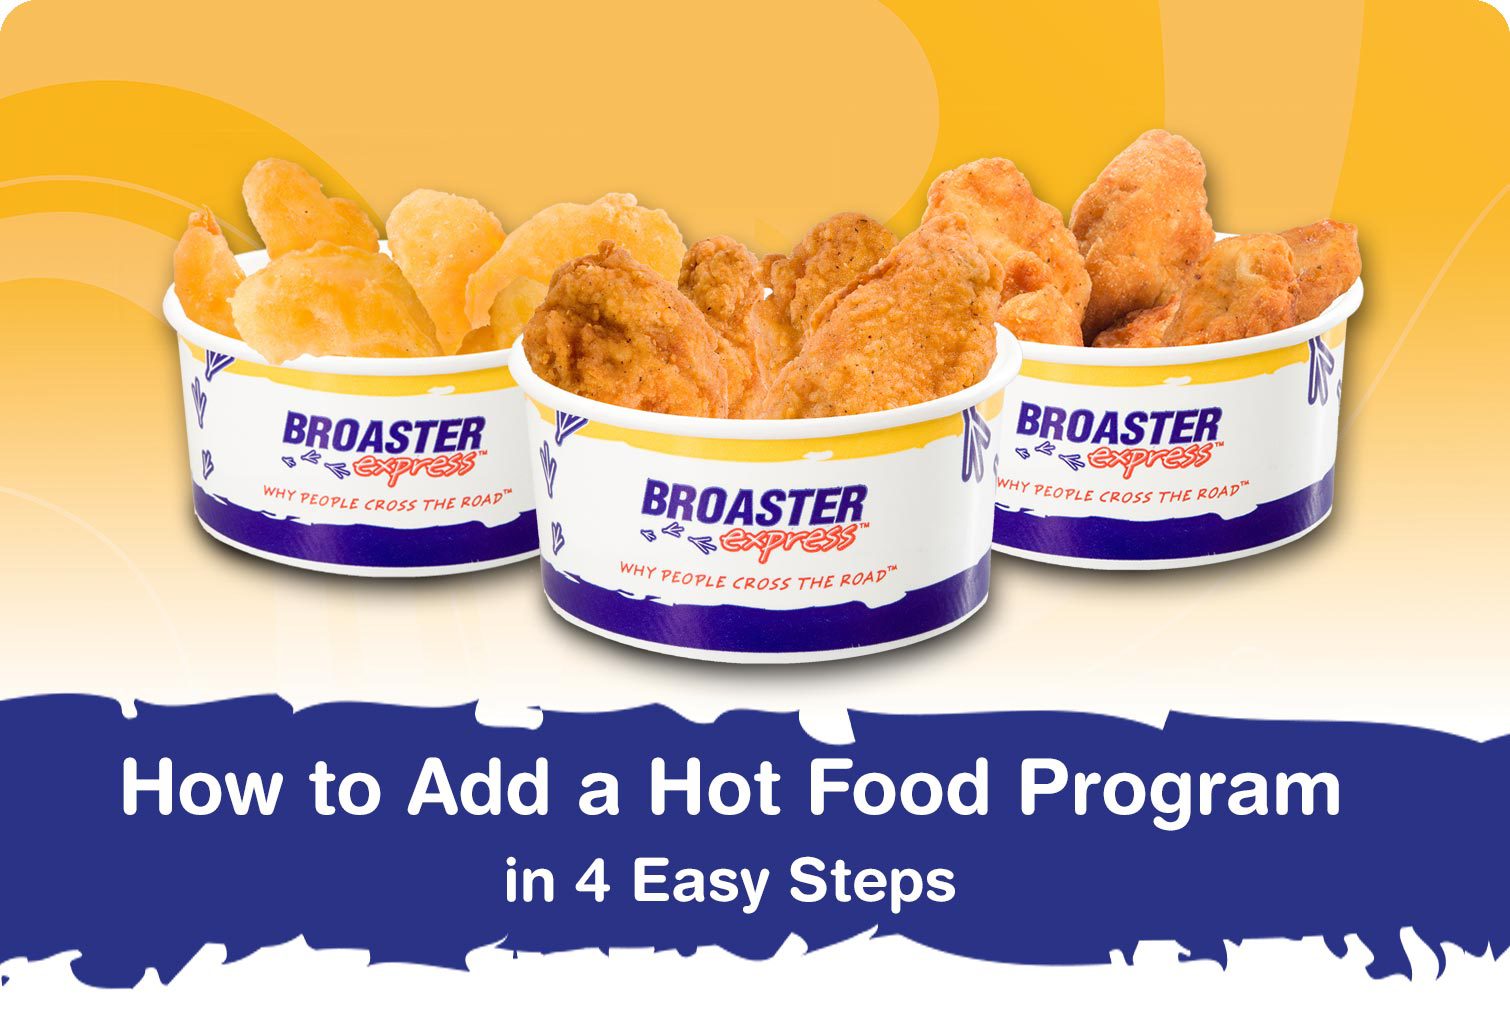 How to add a hot food program to your snack shop